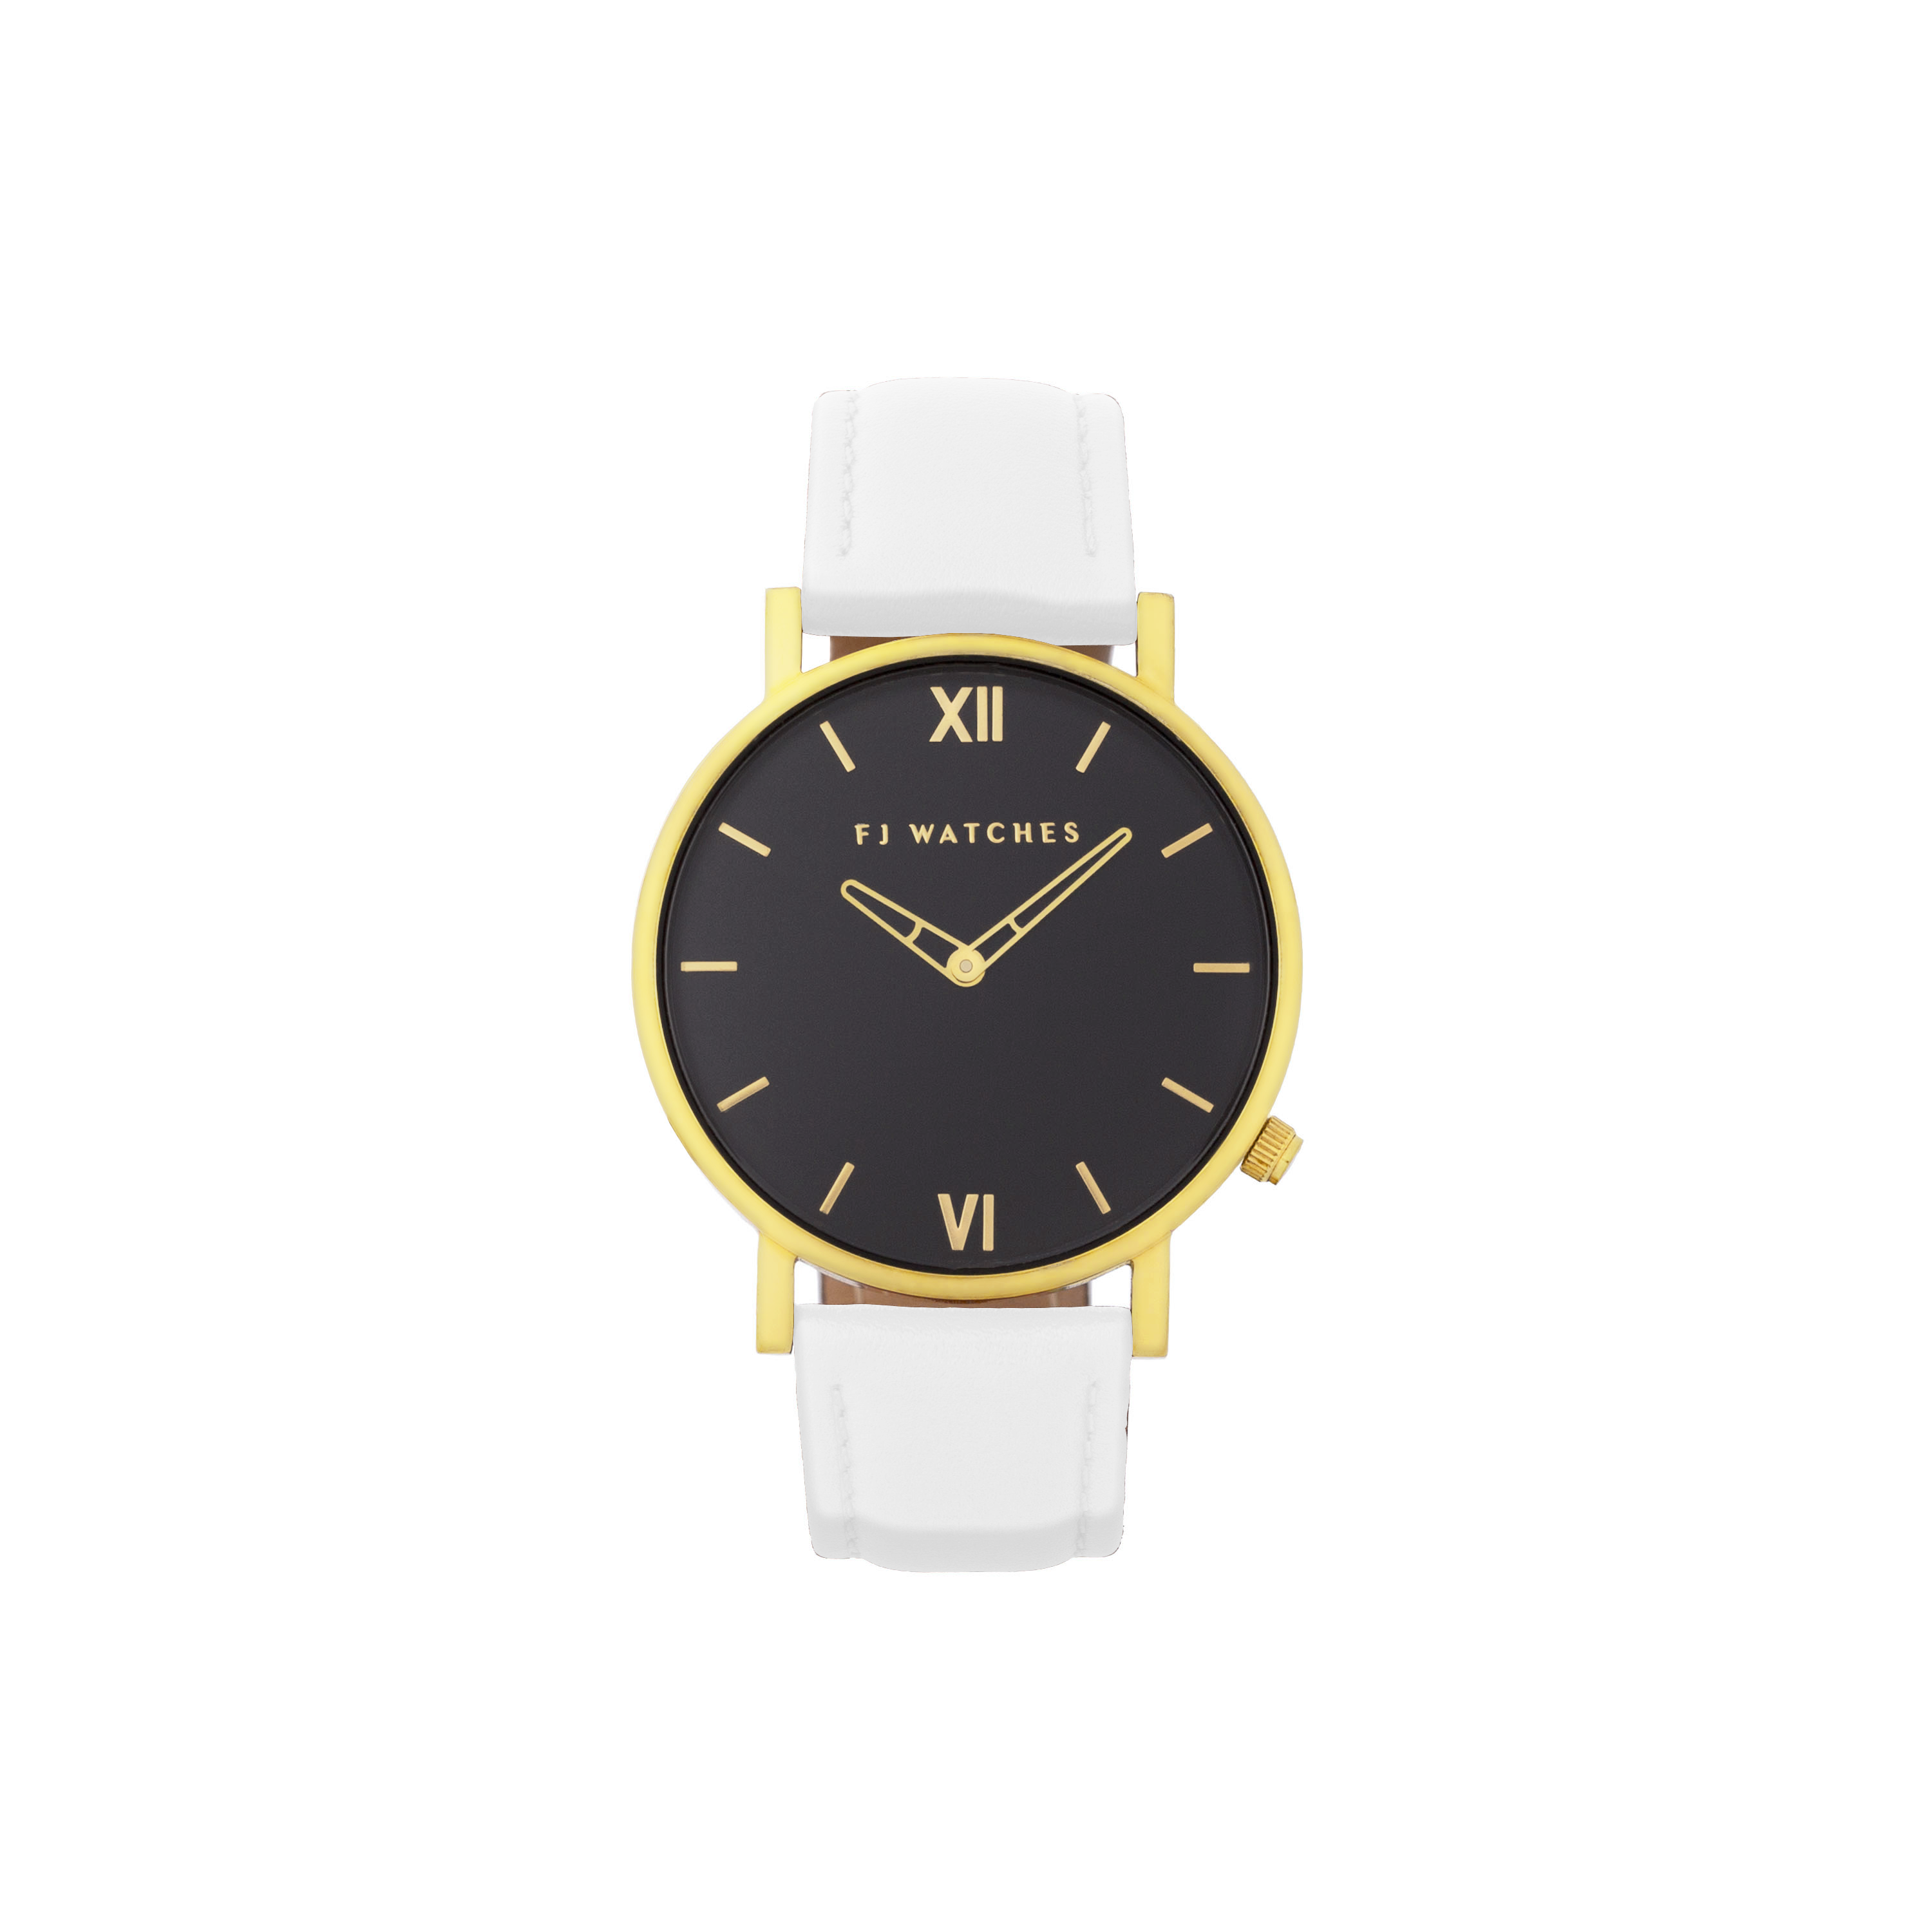 Discover Moonlight, a 36 mm women's watch from Five Jwlry with a black and gold dial. This one can be paired with a wide variety of leather colors, such as black, white, tan and beige!